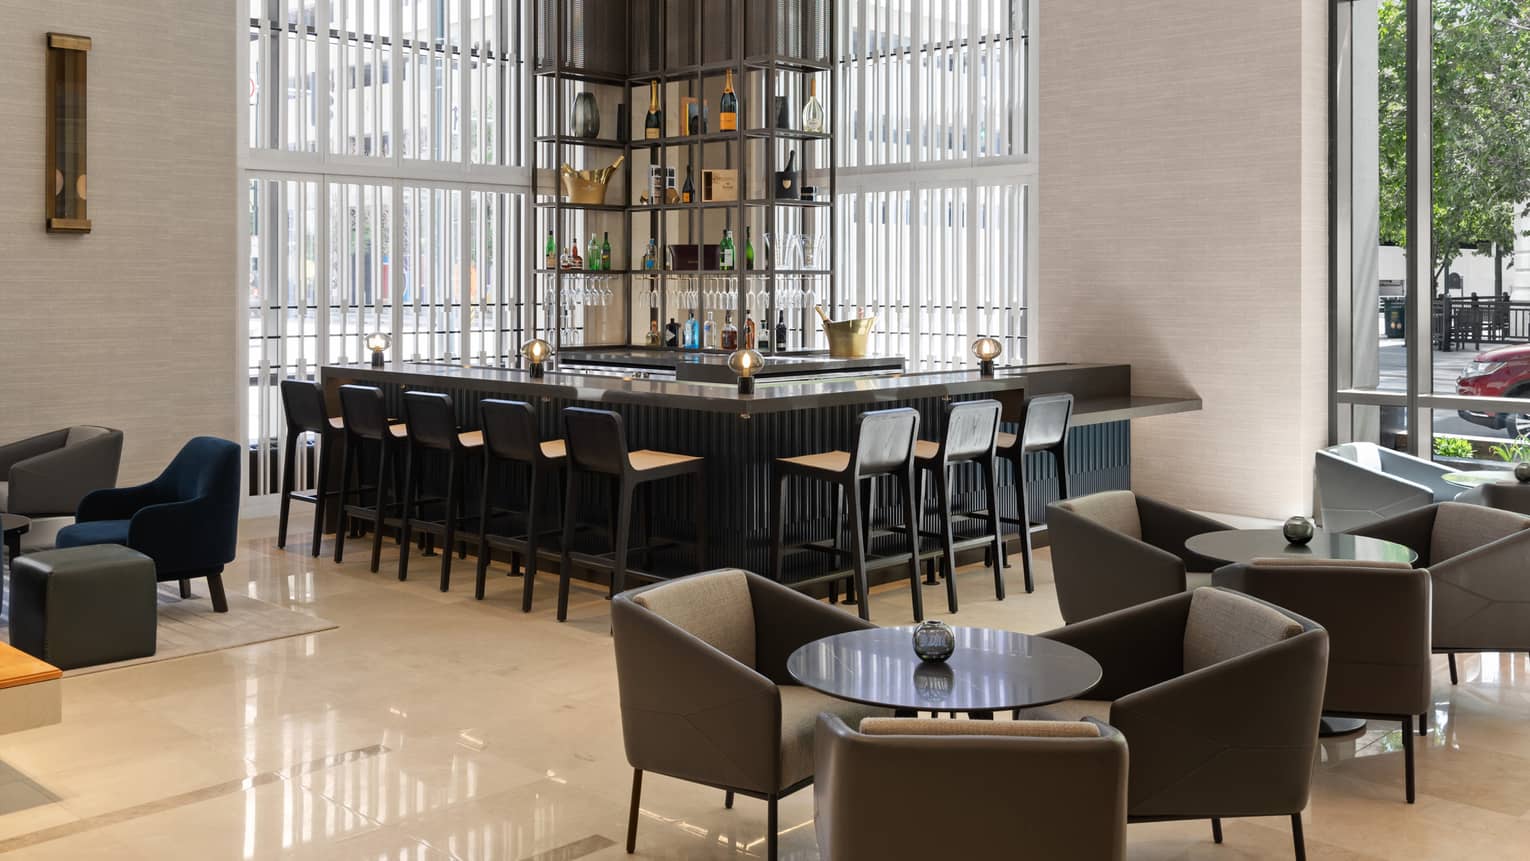 A black bar and lounge by large windows surrounded by black and wood stools and round tables with grey chairs.